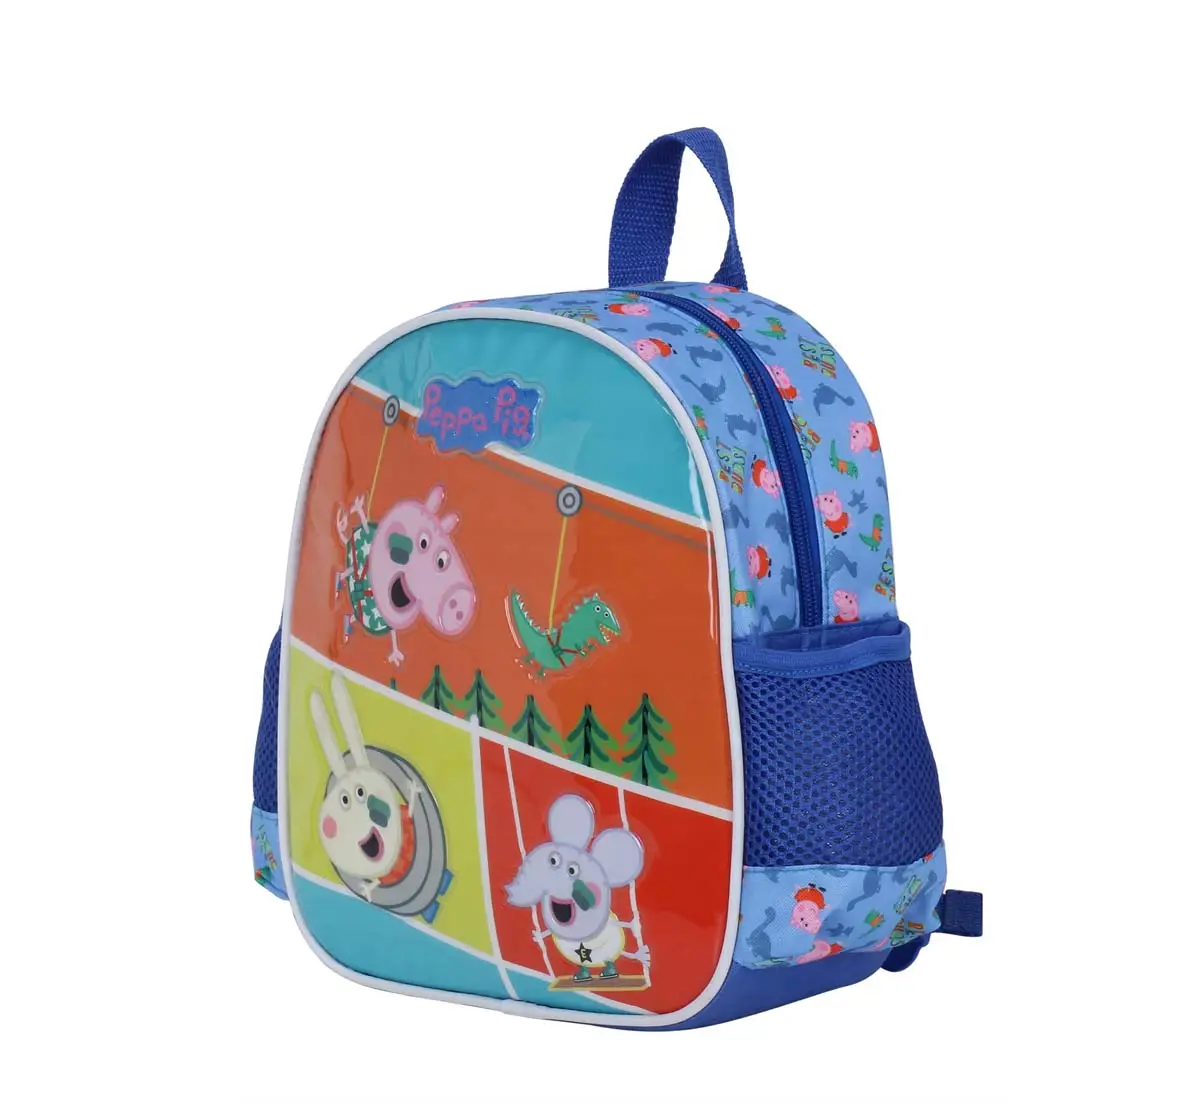 Peppa Pig Garden Play 10 Backpack Bags for Kids age 3Y+ 